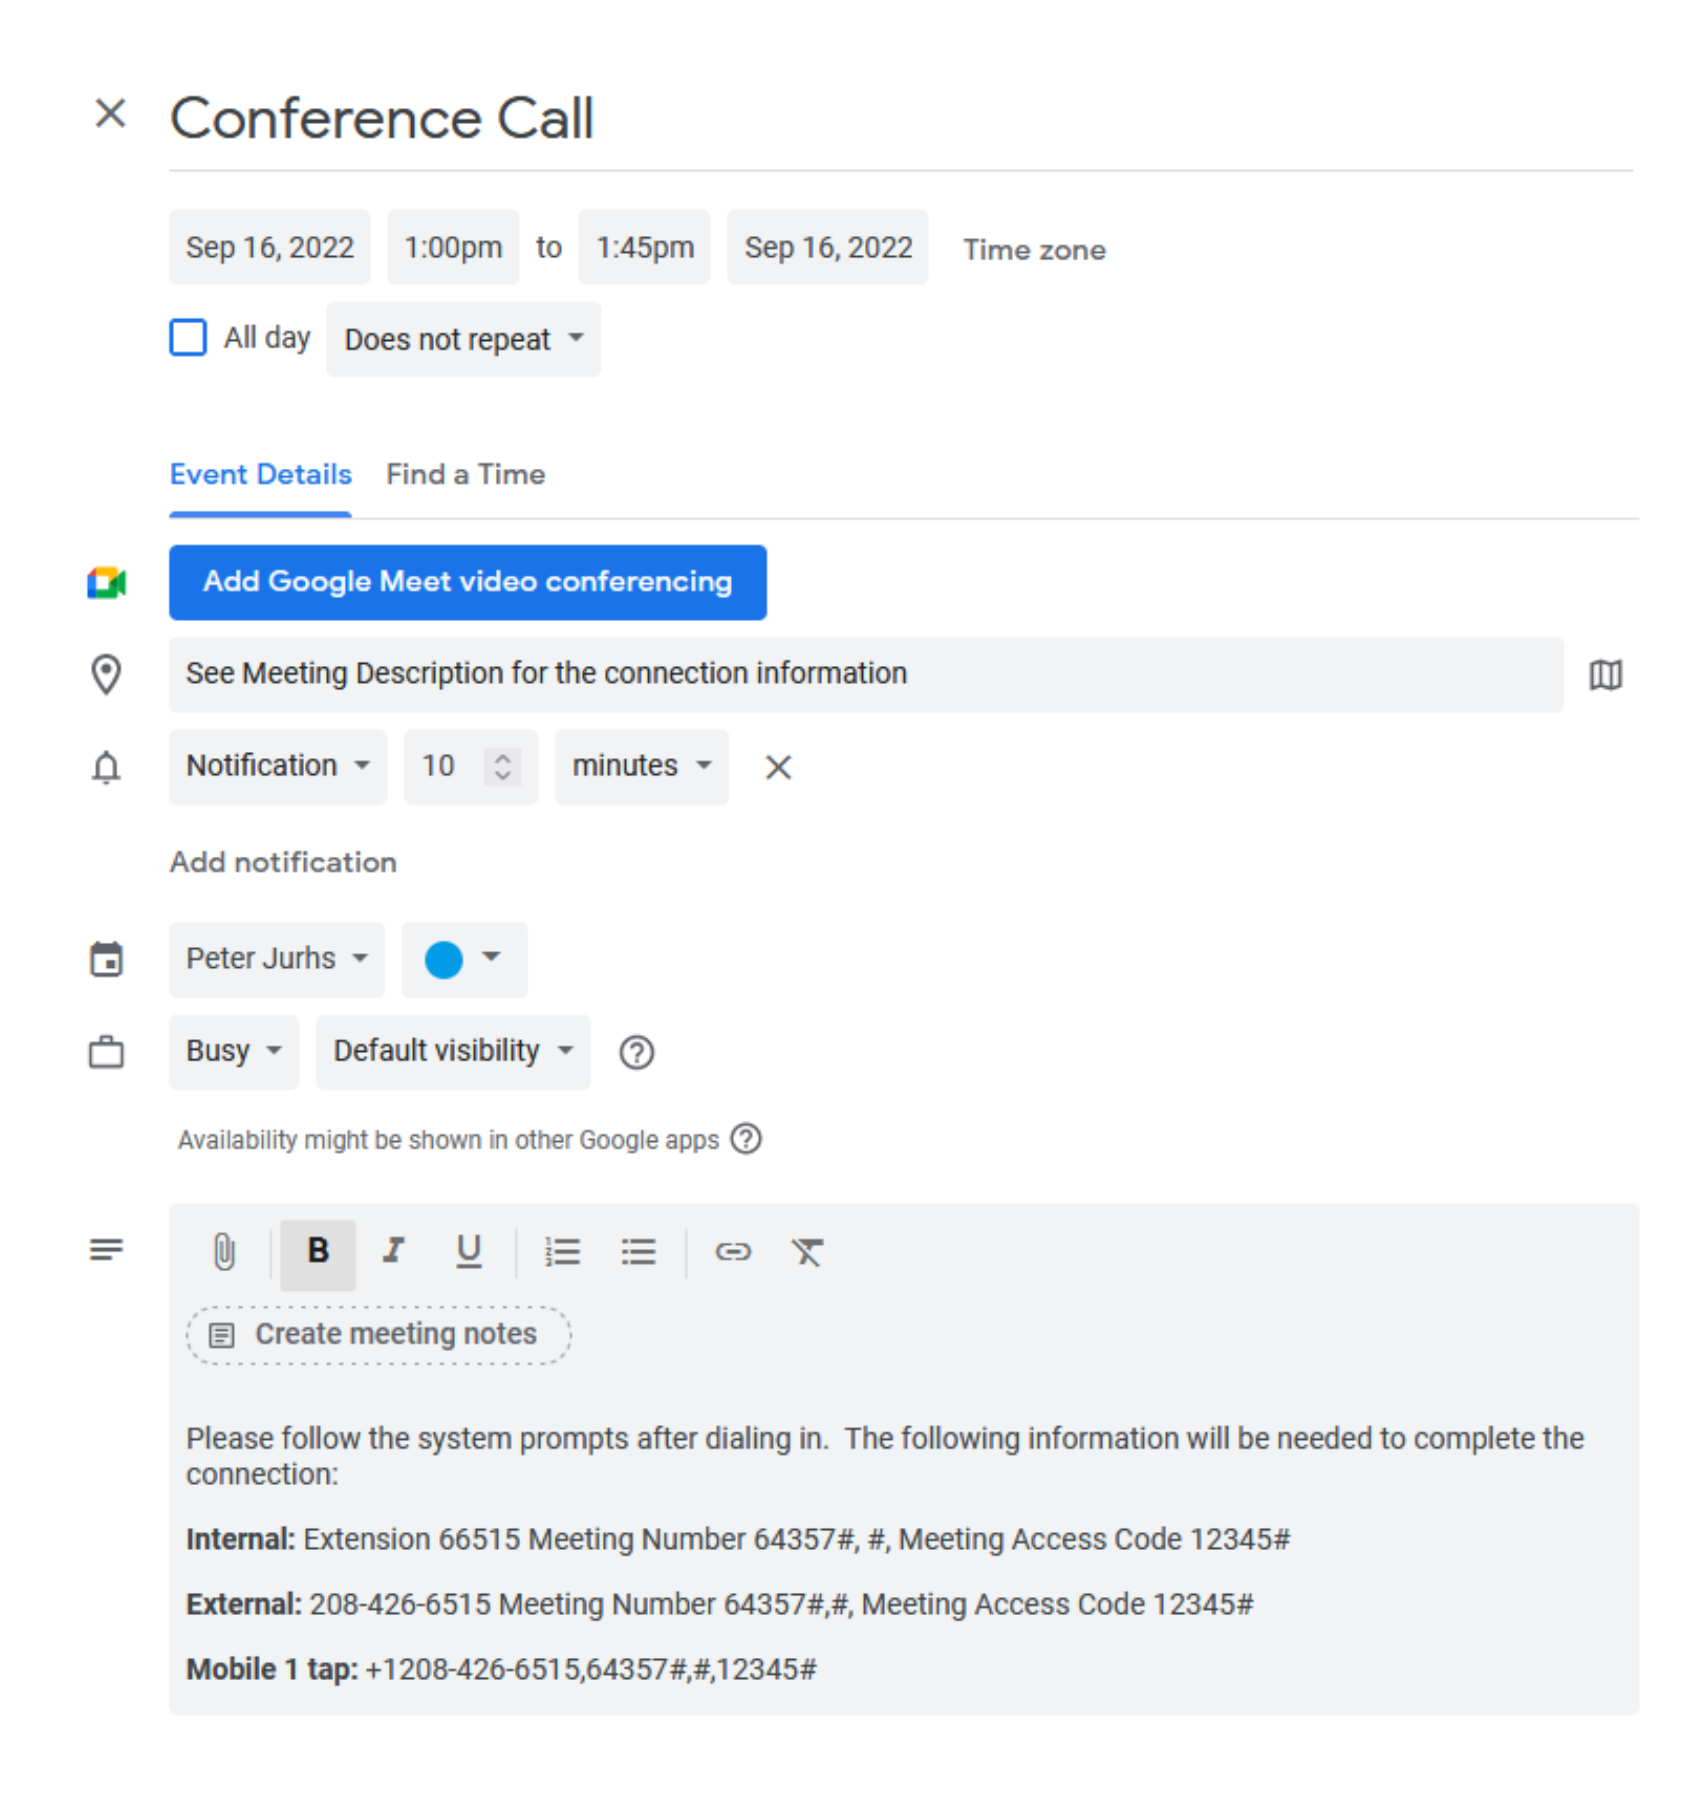 Screenshot of a Conference Now dial-in instructions on a Google calendar invite